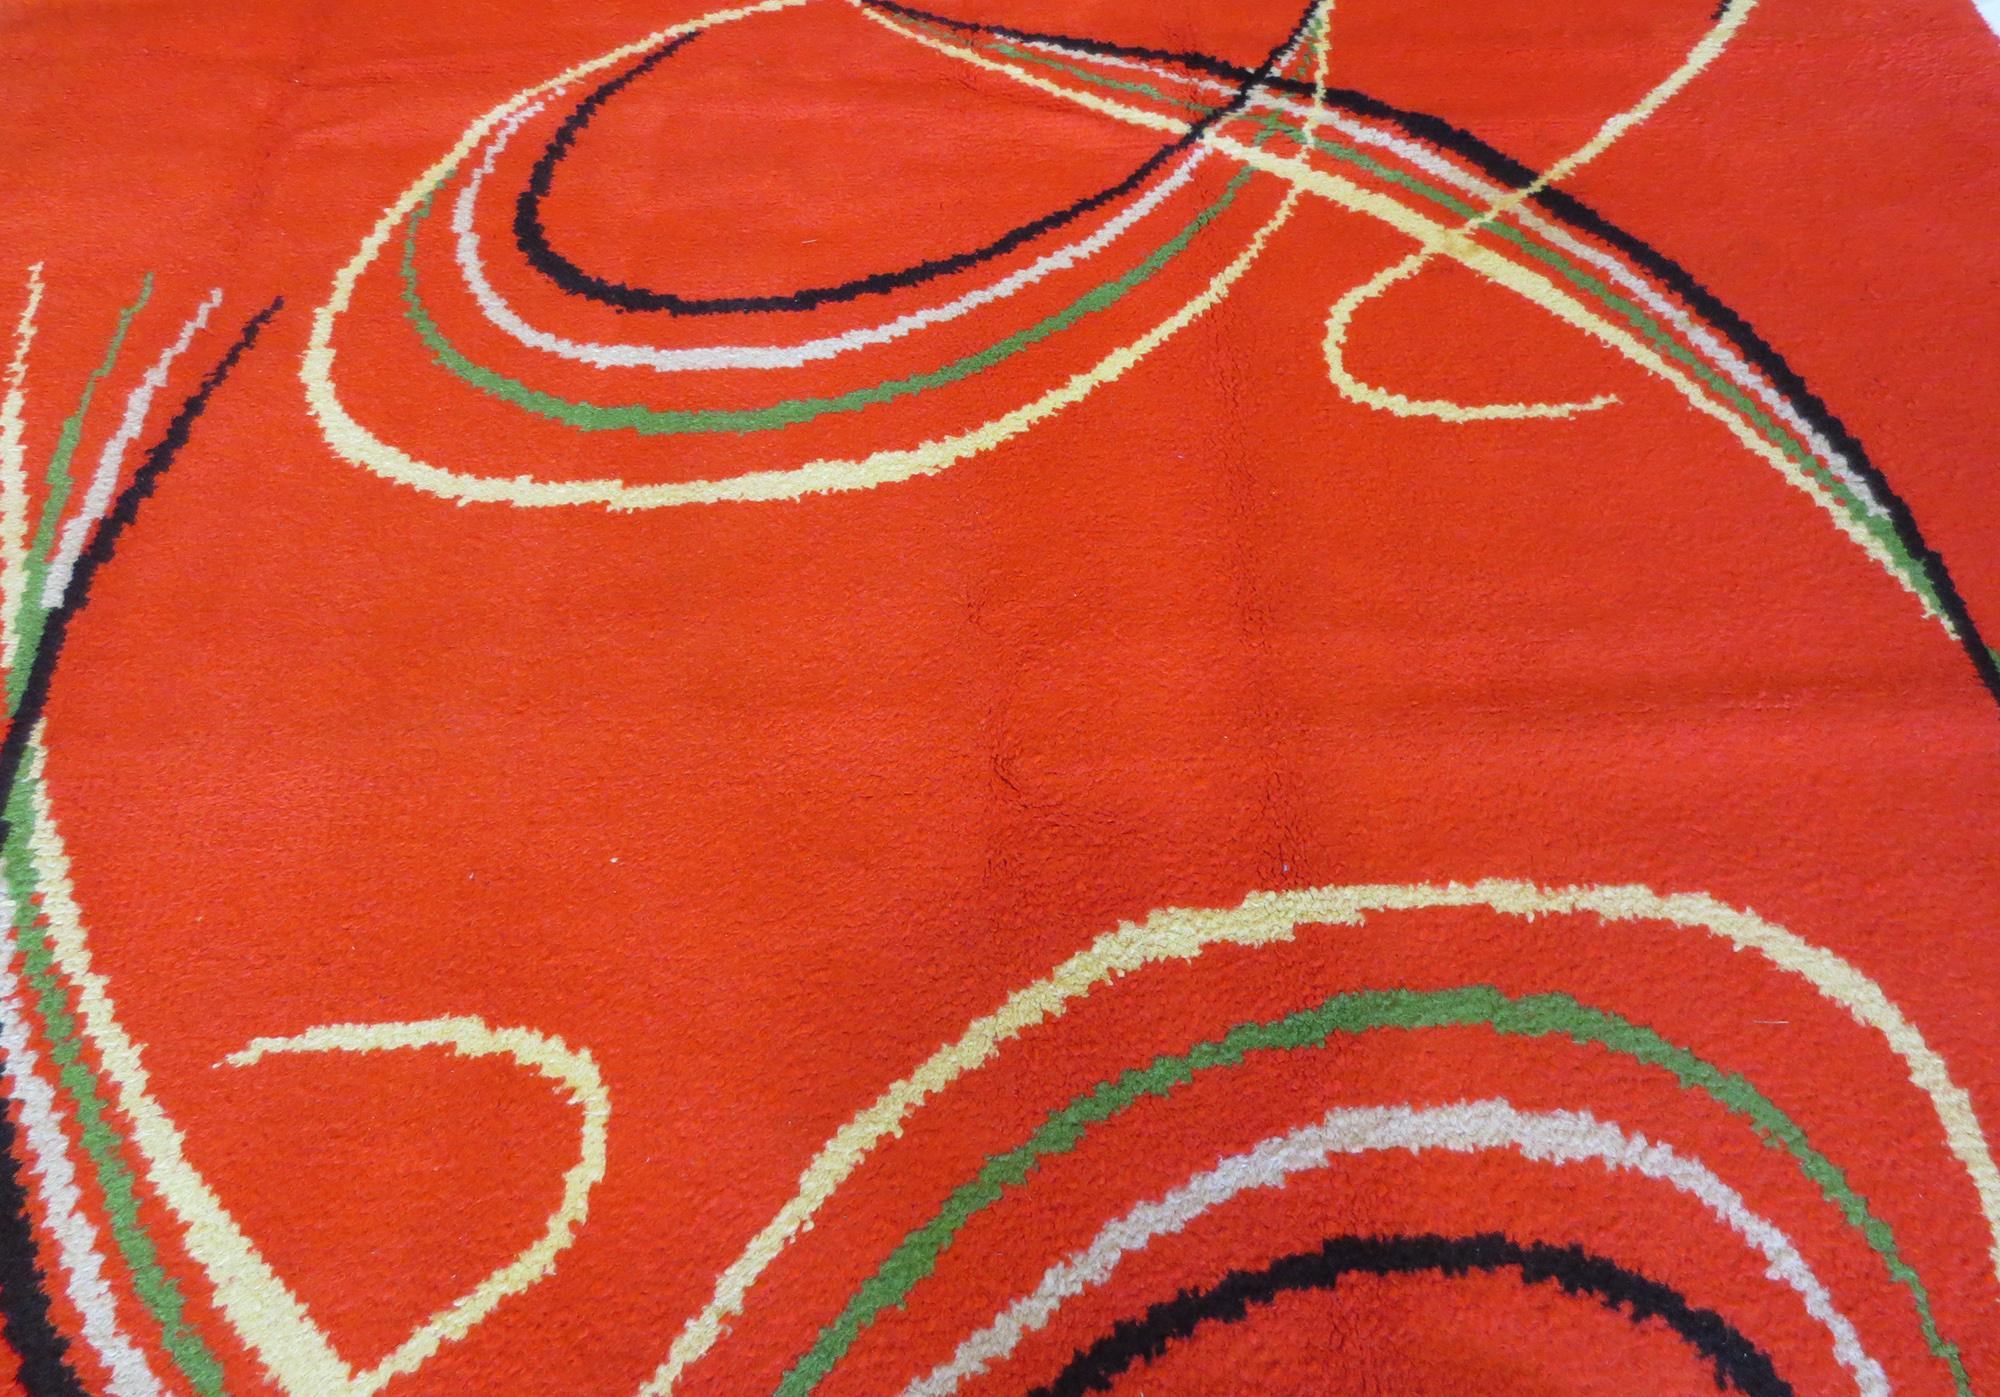 This a boldly colored vintage Swedish deco shag rug from the mid-20th century with expressive lines that give it distinct character. It's an exciting piece, with organic, curvy lines that creates movement on a backdrop of a vivid bright red color. A